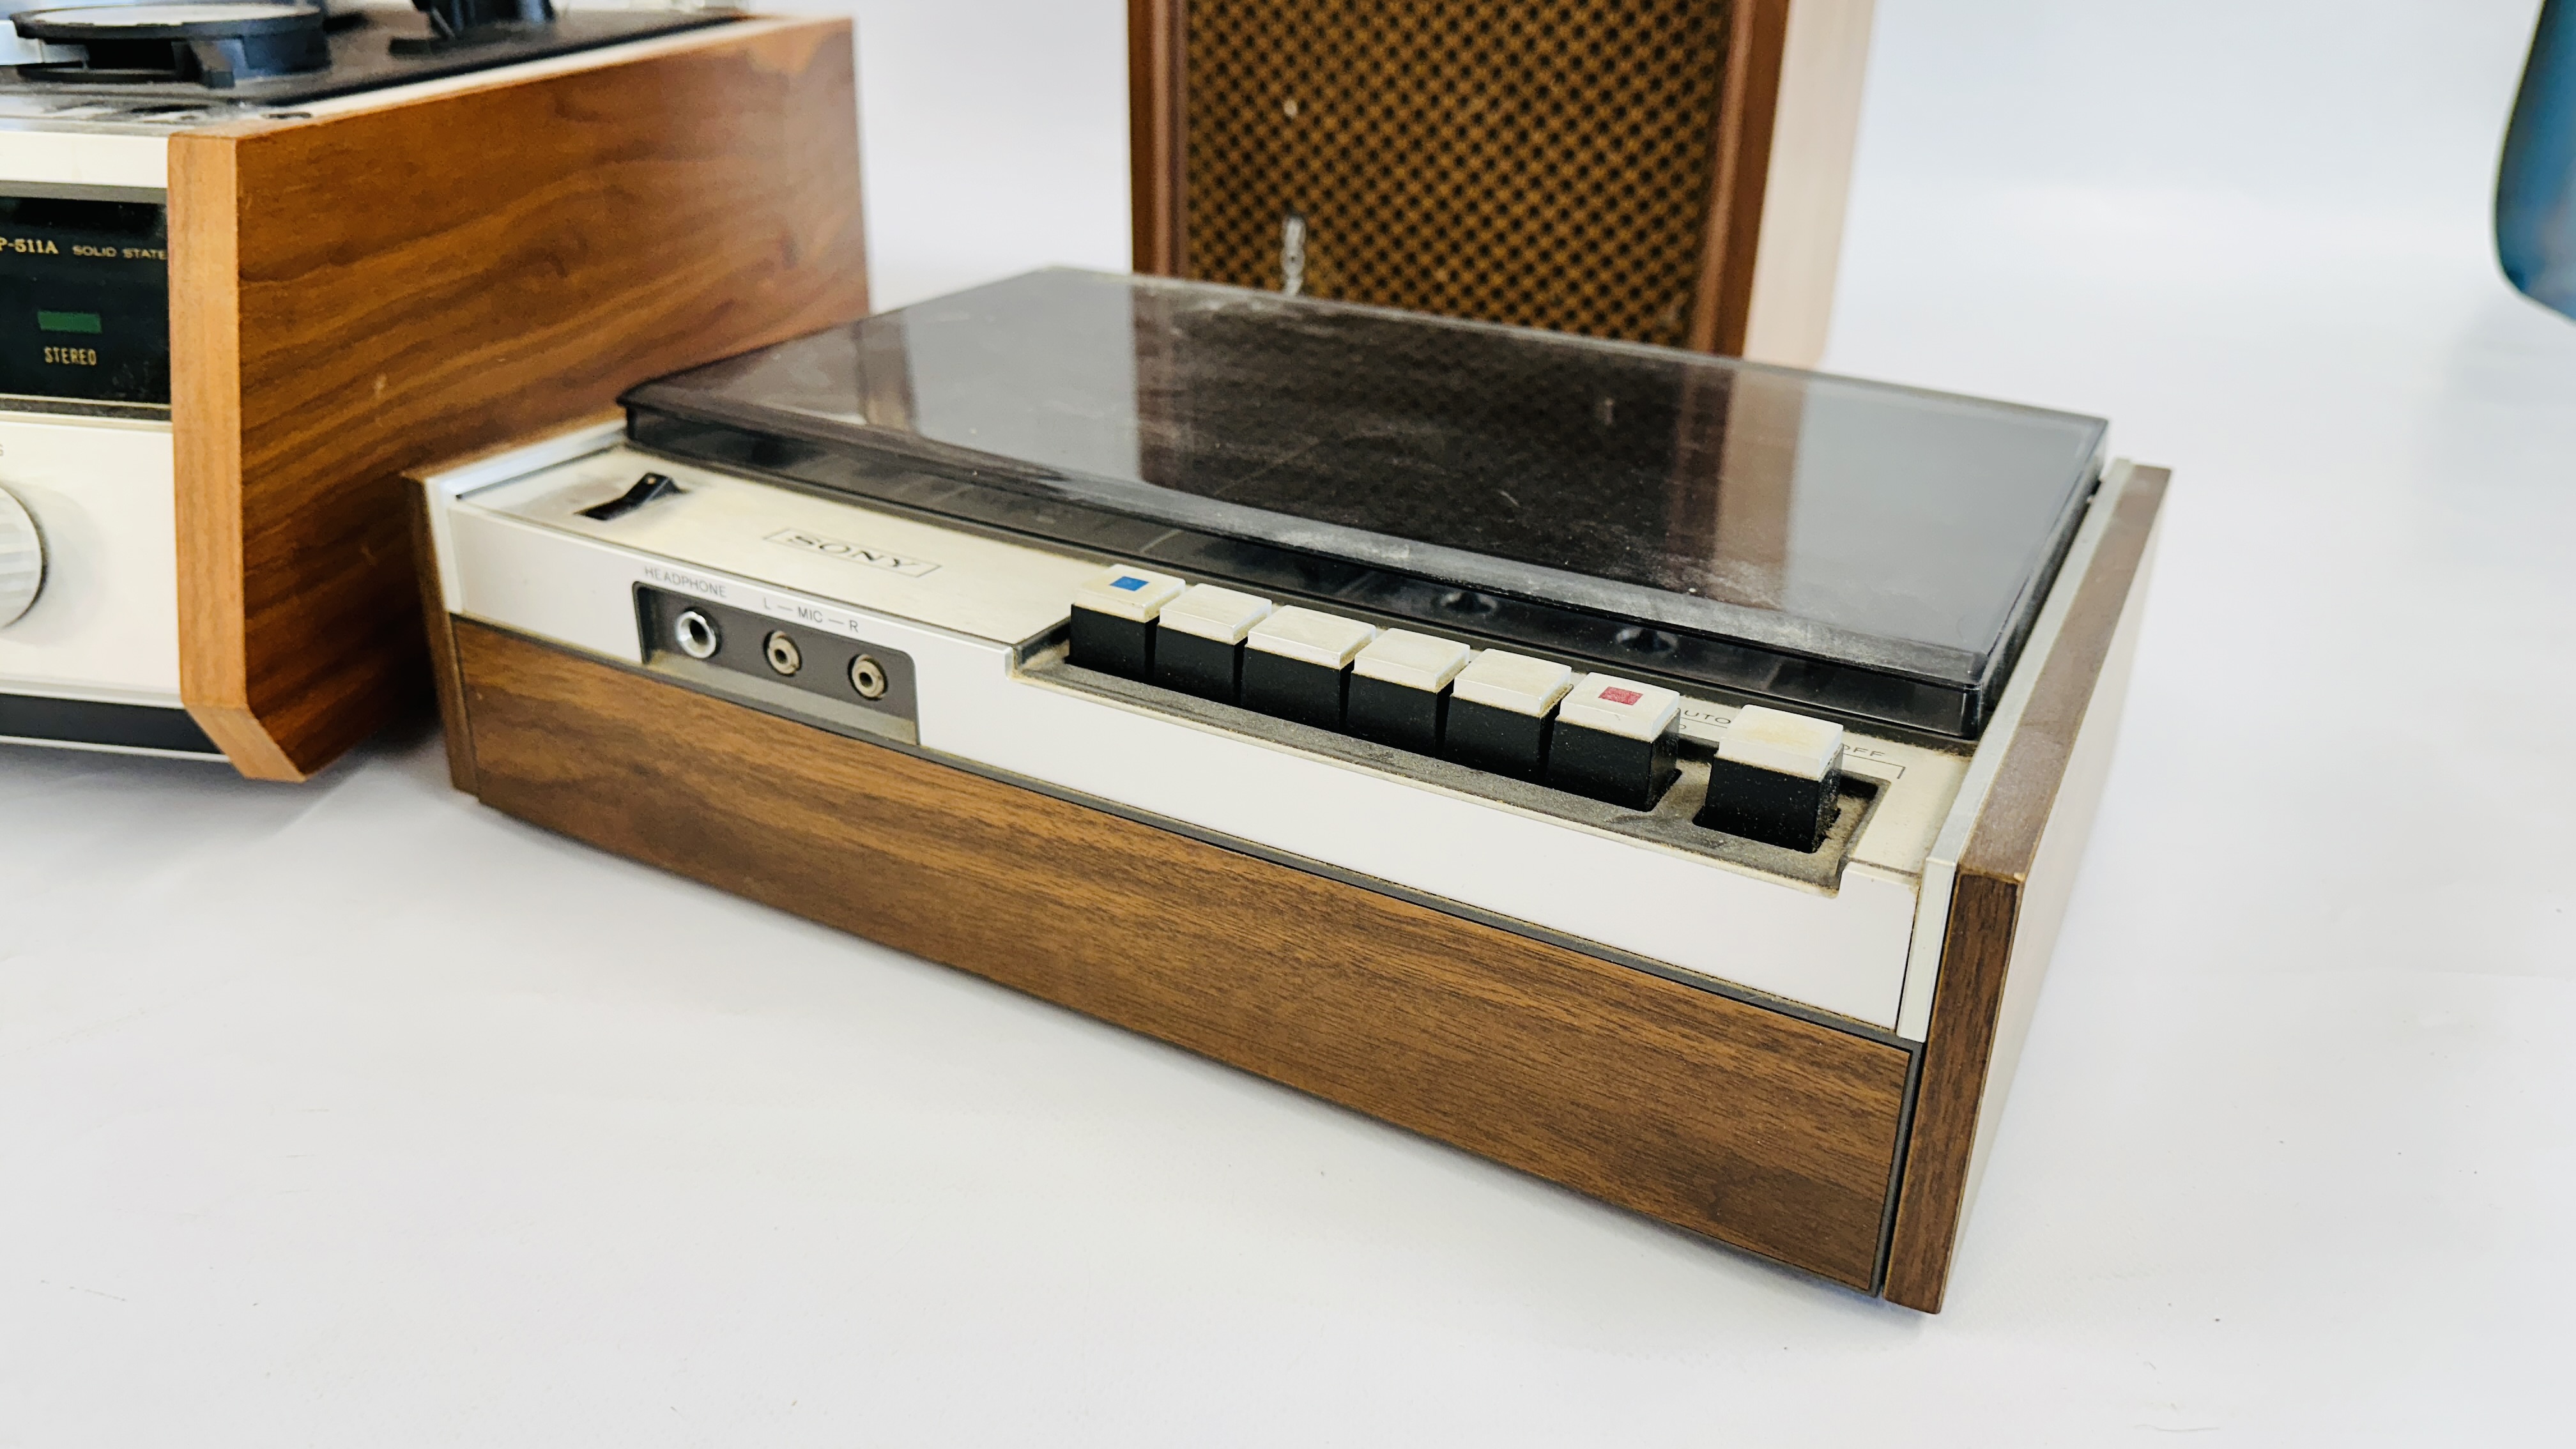 RETRO SONY STEREO MUSIC SYSTEM MODEL HP-511A COMPLETE WITH SONY SS-510 SPEAKER SYSTEM AND SONY - Image 5 of 9